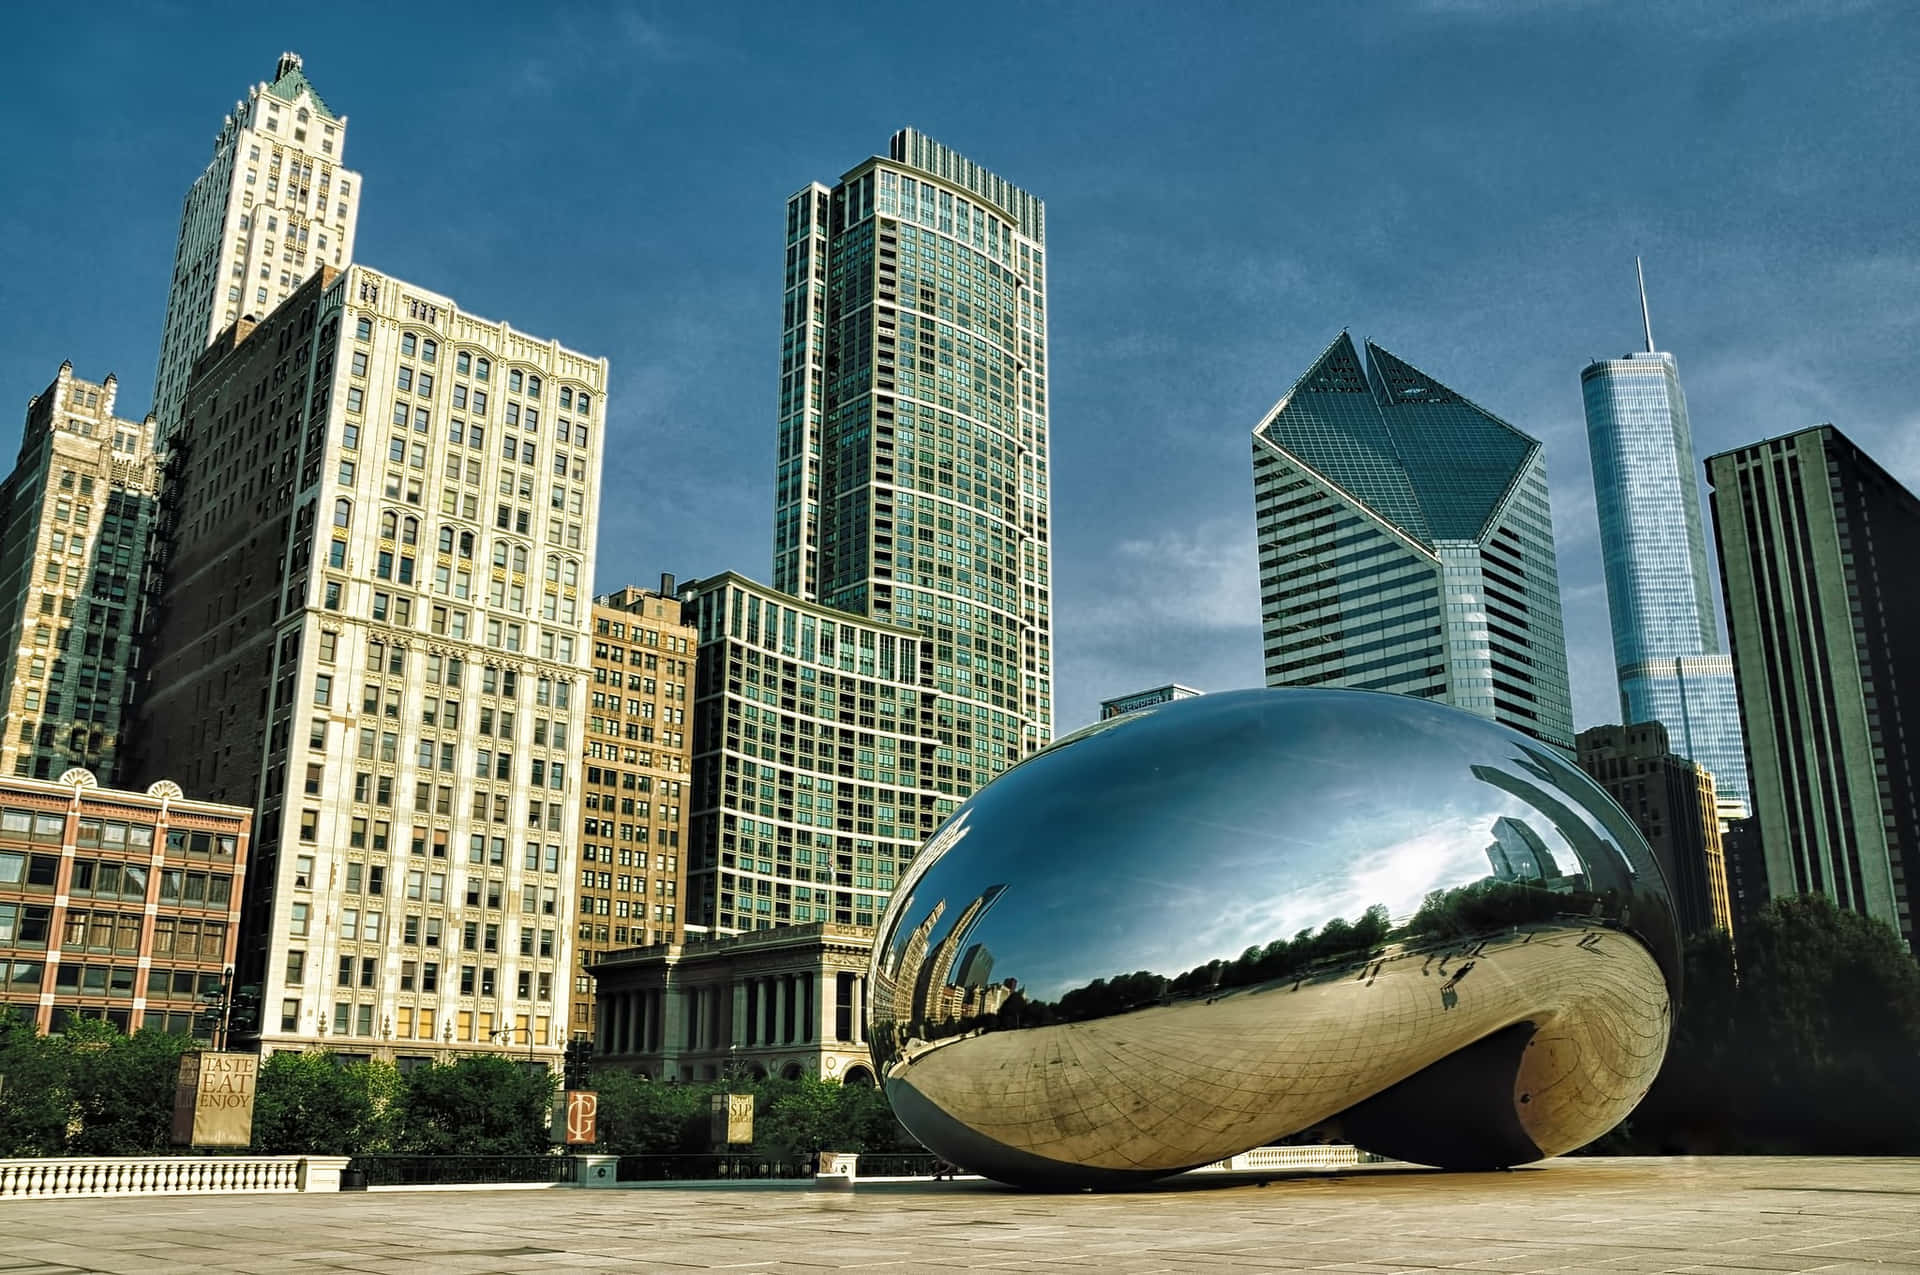 Cloud Gate Bean-shaped Structure In Chicago Background